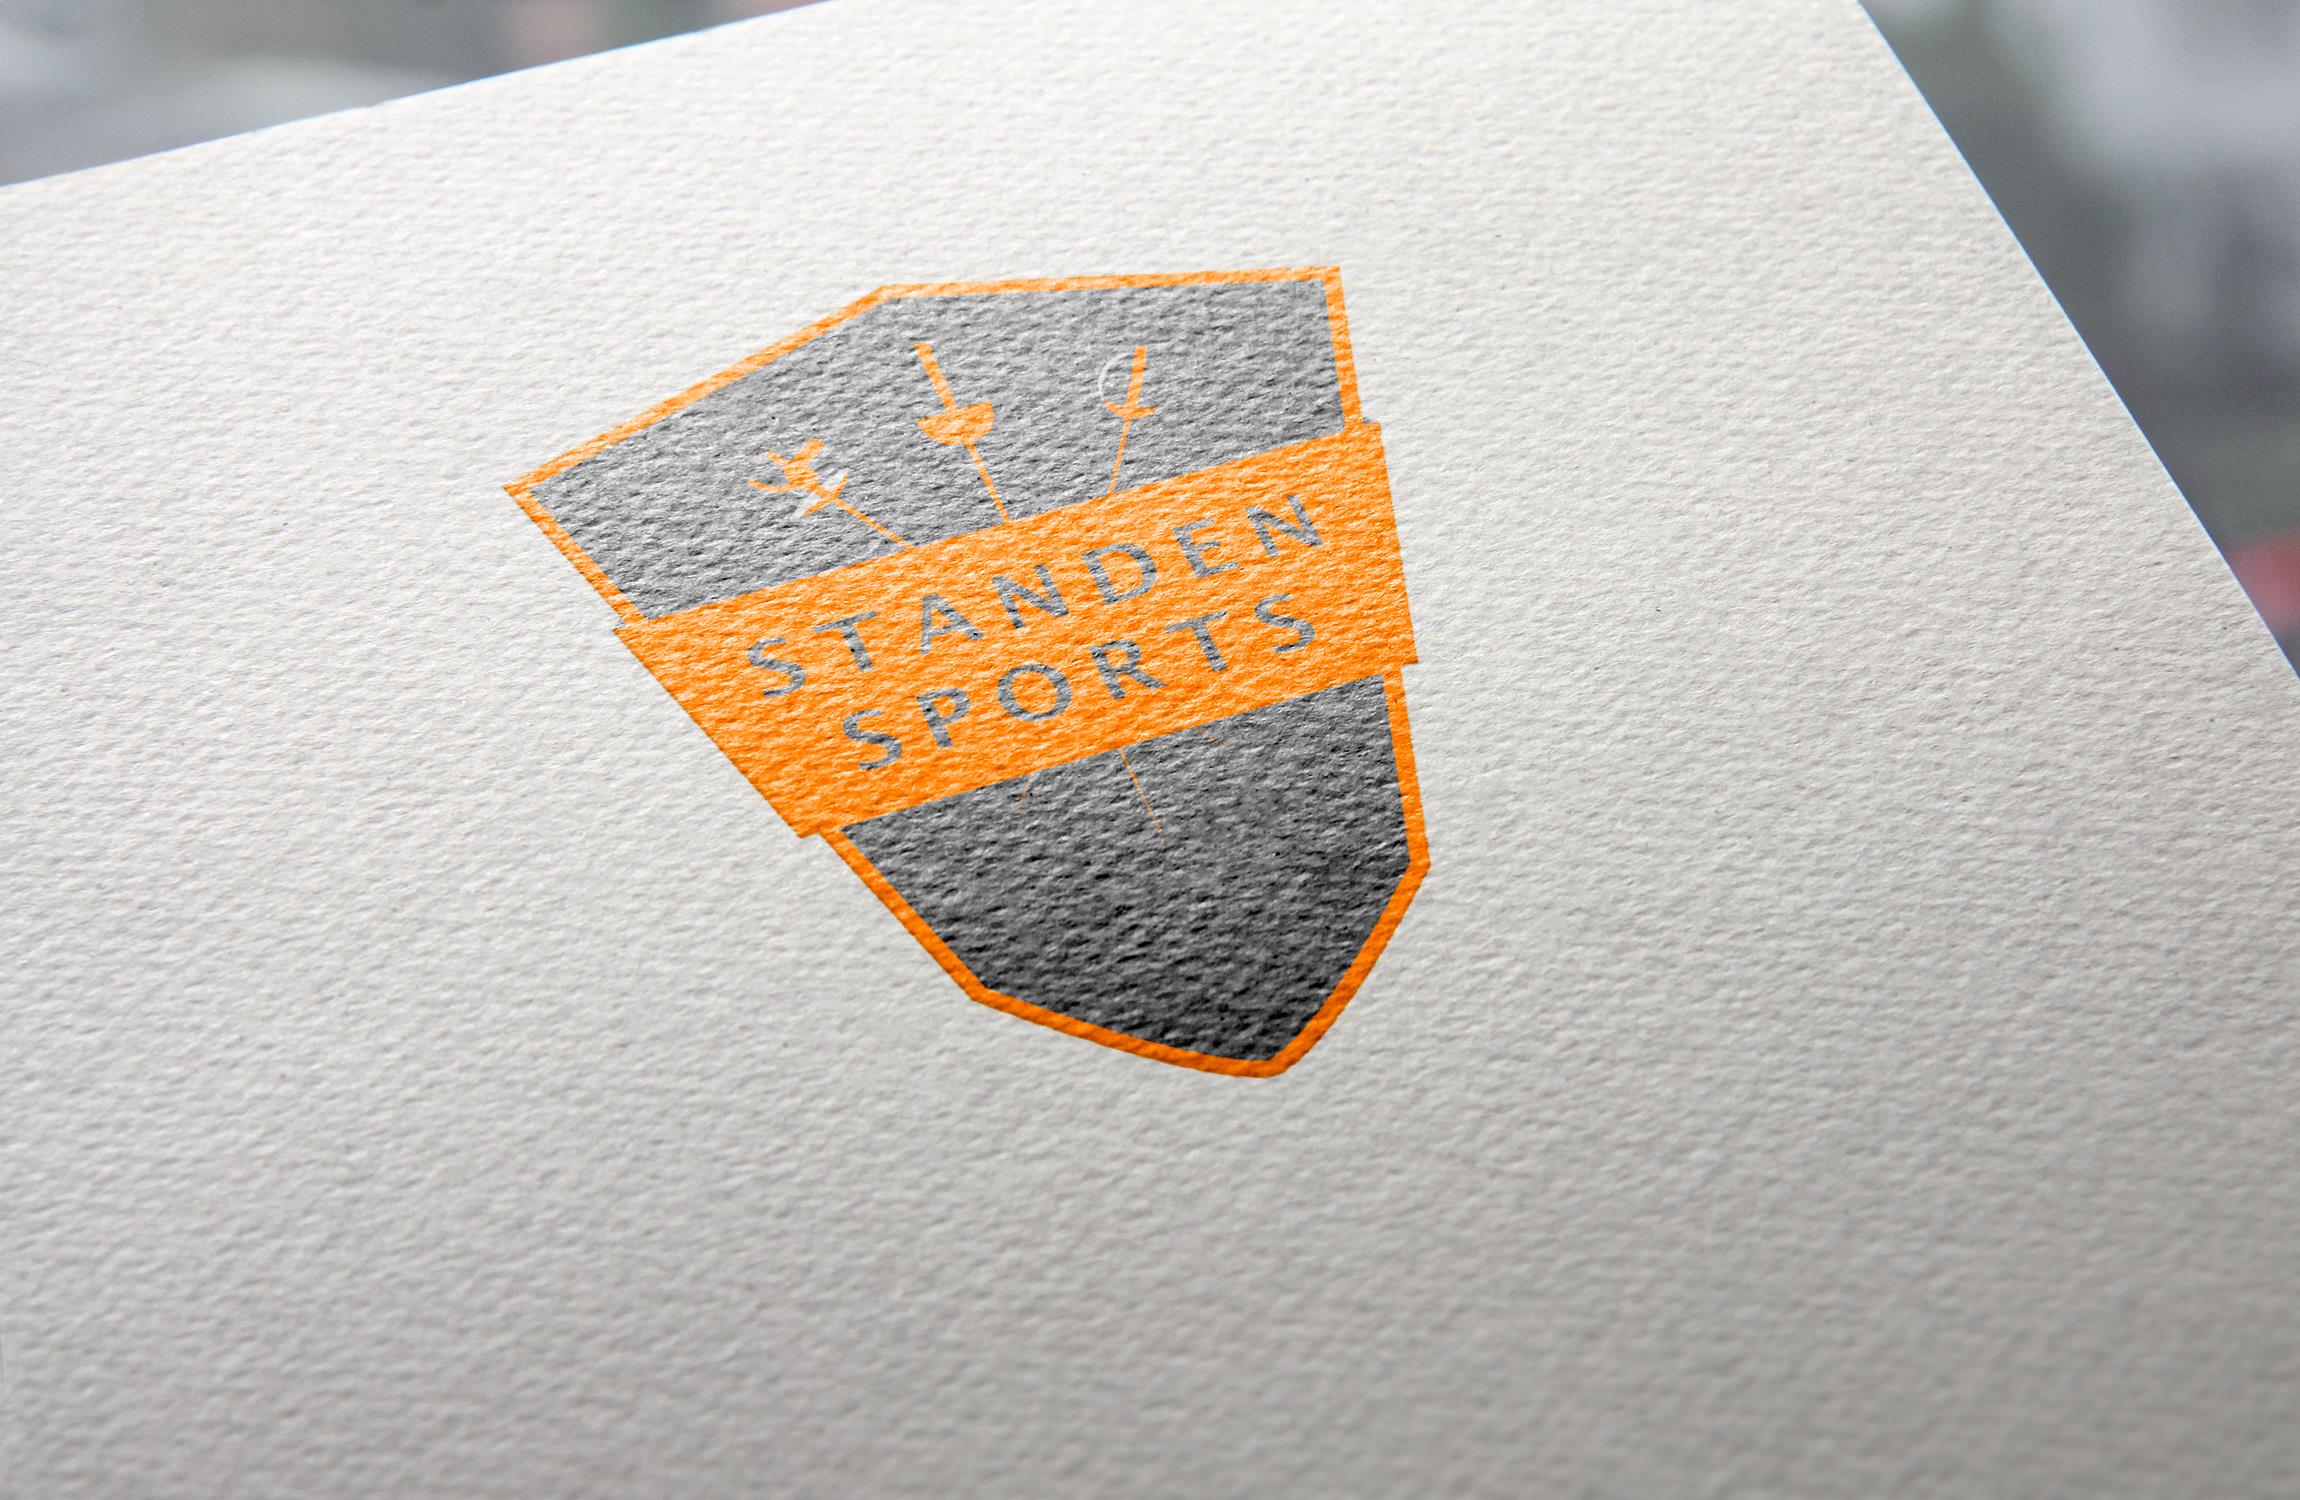 Standen Sports Ltd logo mocked up on the top right hand corner of an invoice